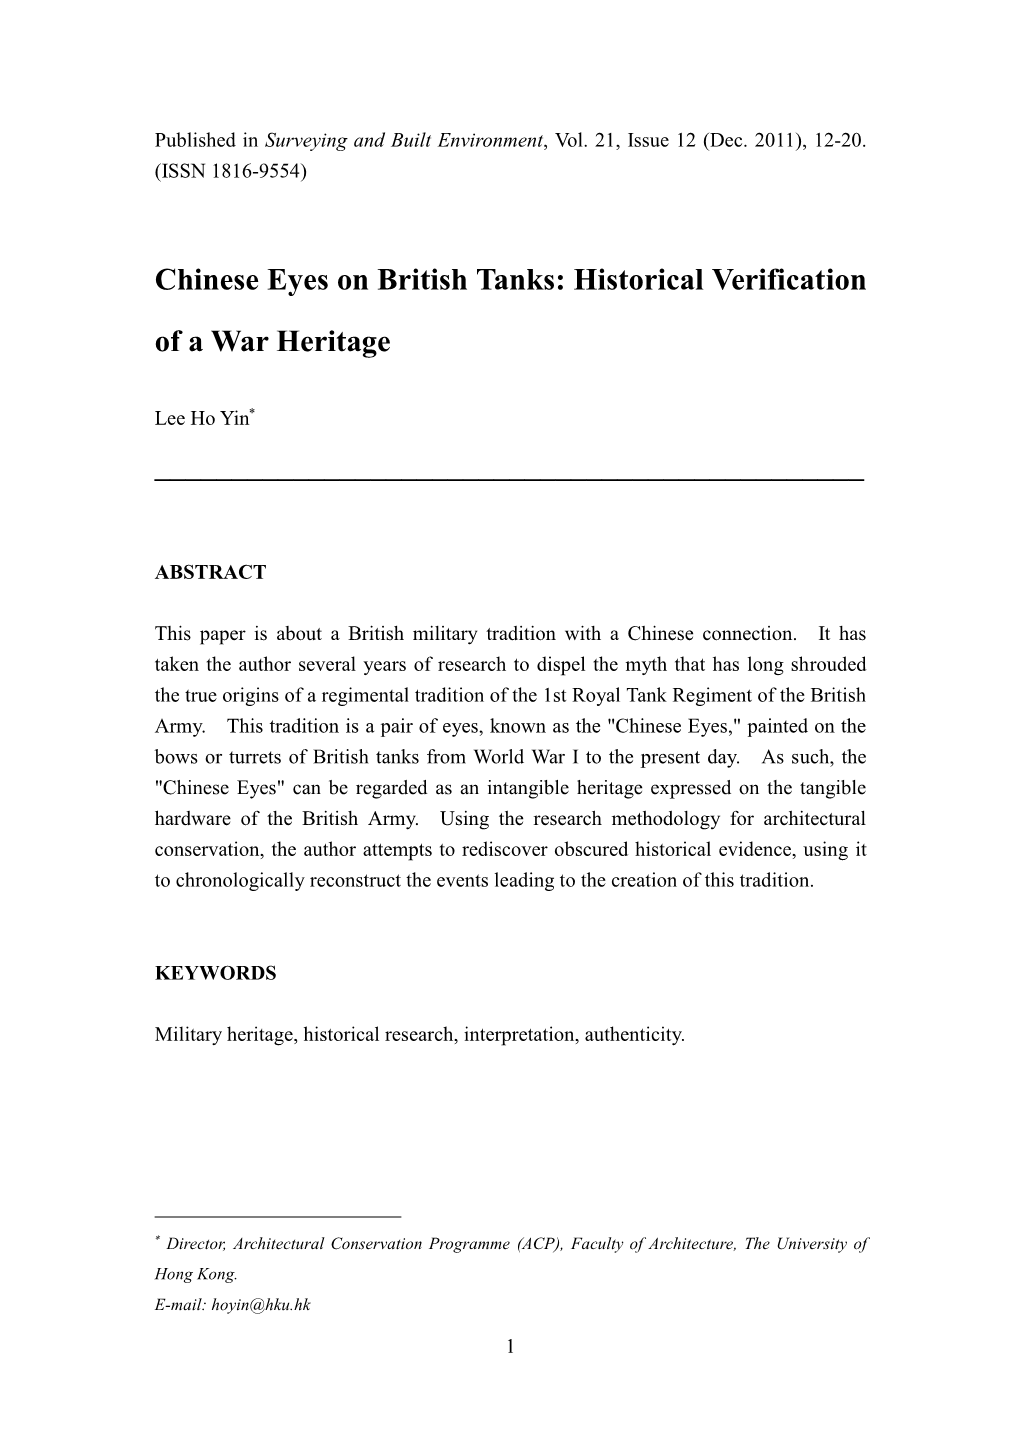 The Role of Chinese Labour Corps in Repairing and Maintaining British